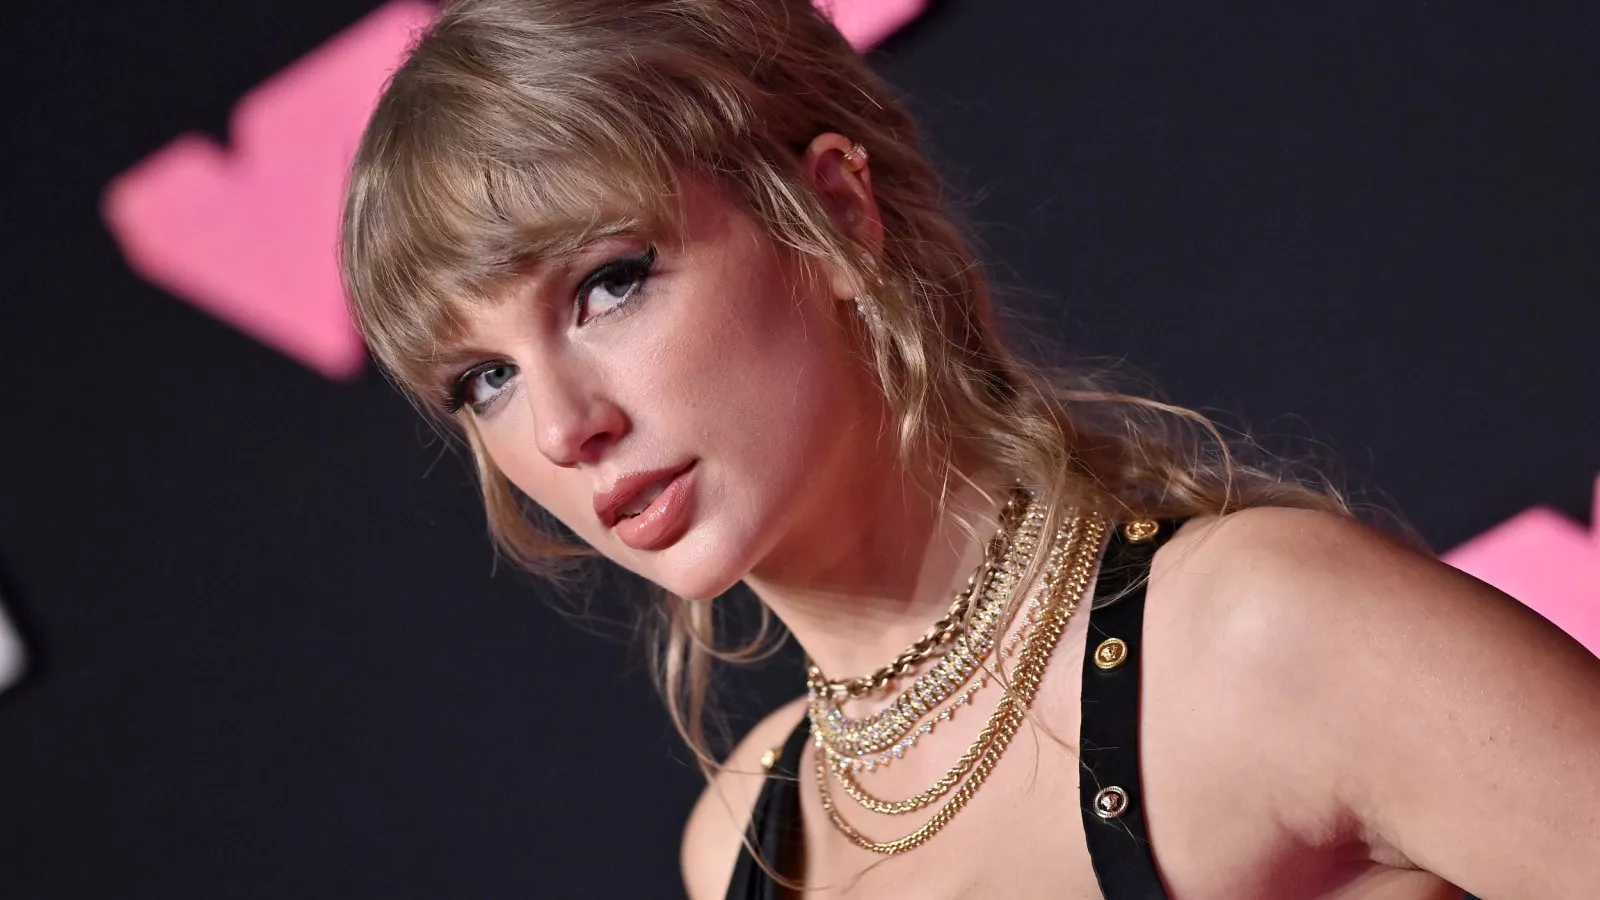 Taylor Swift Easter egg word puzzles in Google Search